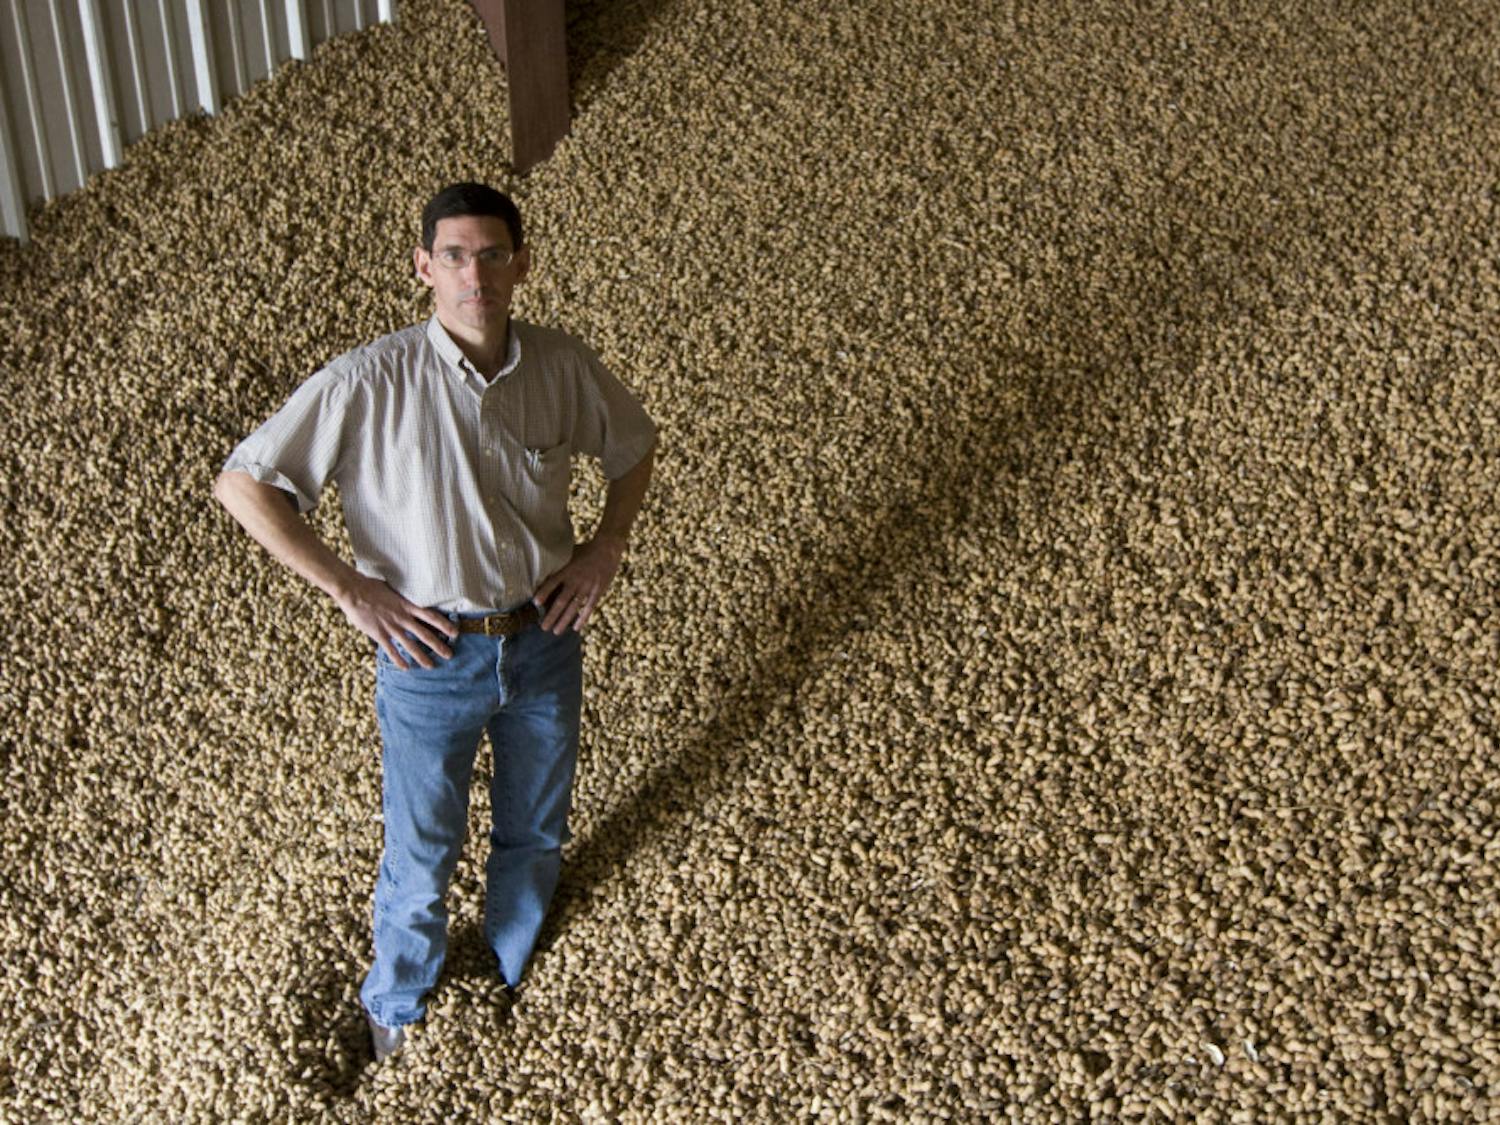 Agronomist Barry Tillman stands in peanuts.&nbsp;“The techniques that we develop could be utilized by others to build on for future improvements,” he said.